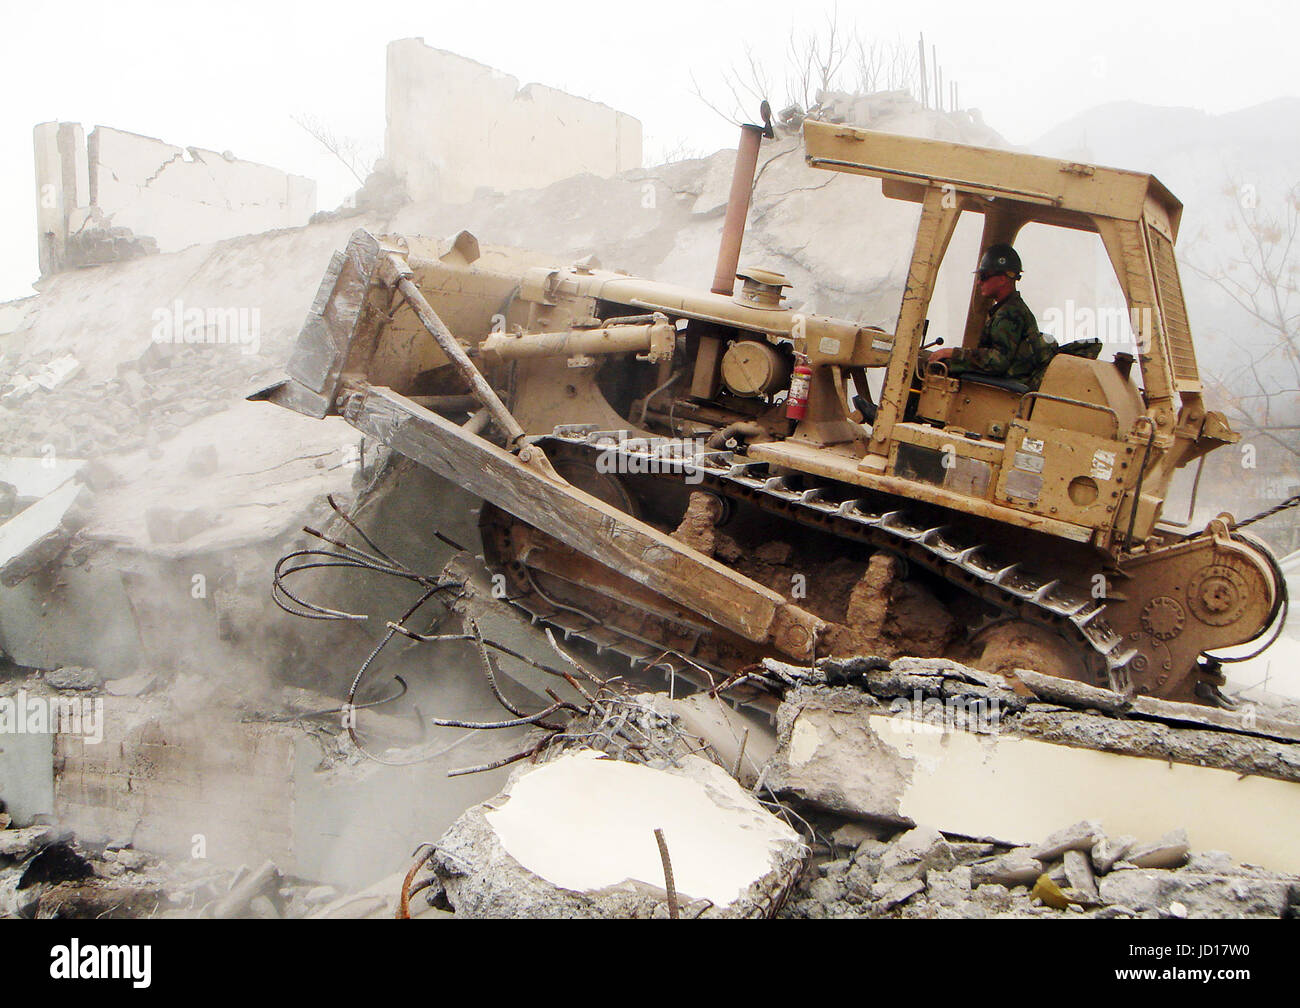 A U.S. Navy Seabee operates a bulldozer to demolish an unsafe building in Muzaffarabad, Pakistan. The Department of Defense is supporting the US State Department and provided disaster relief supplies and services following the massive earthquake that struck Pakistan and parts of India and Afghanistan.  DoD photo by Petty Officer 2nd Class James Godown, U.S. Navy Stock Photo